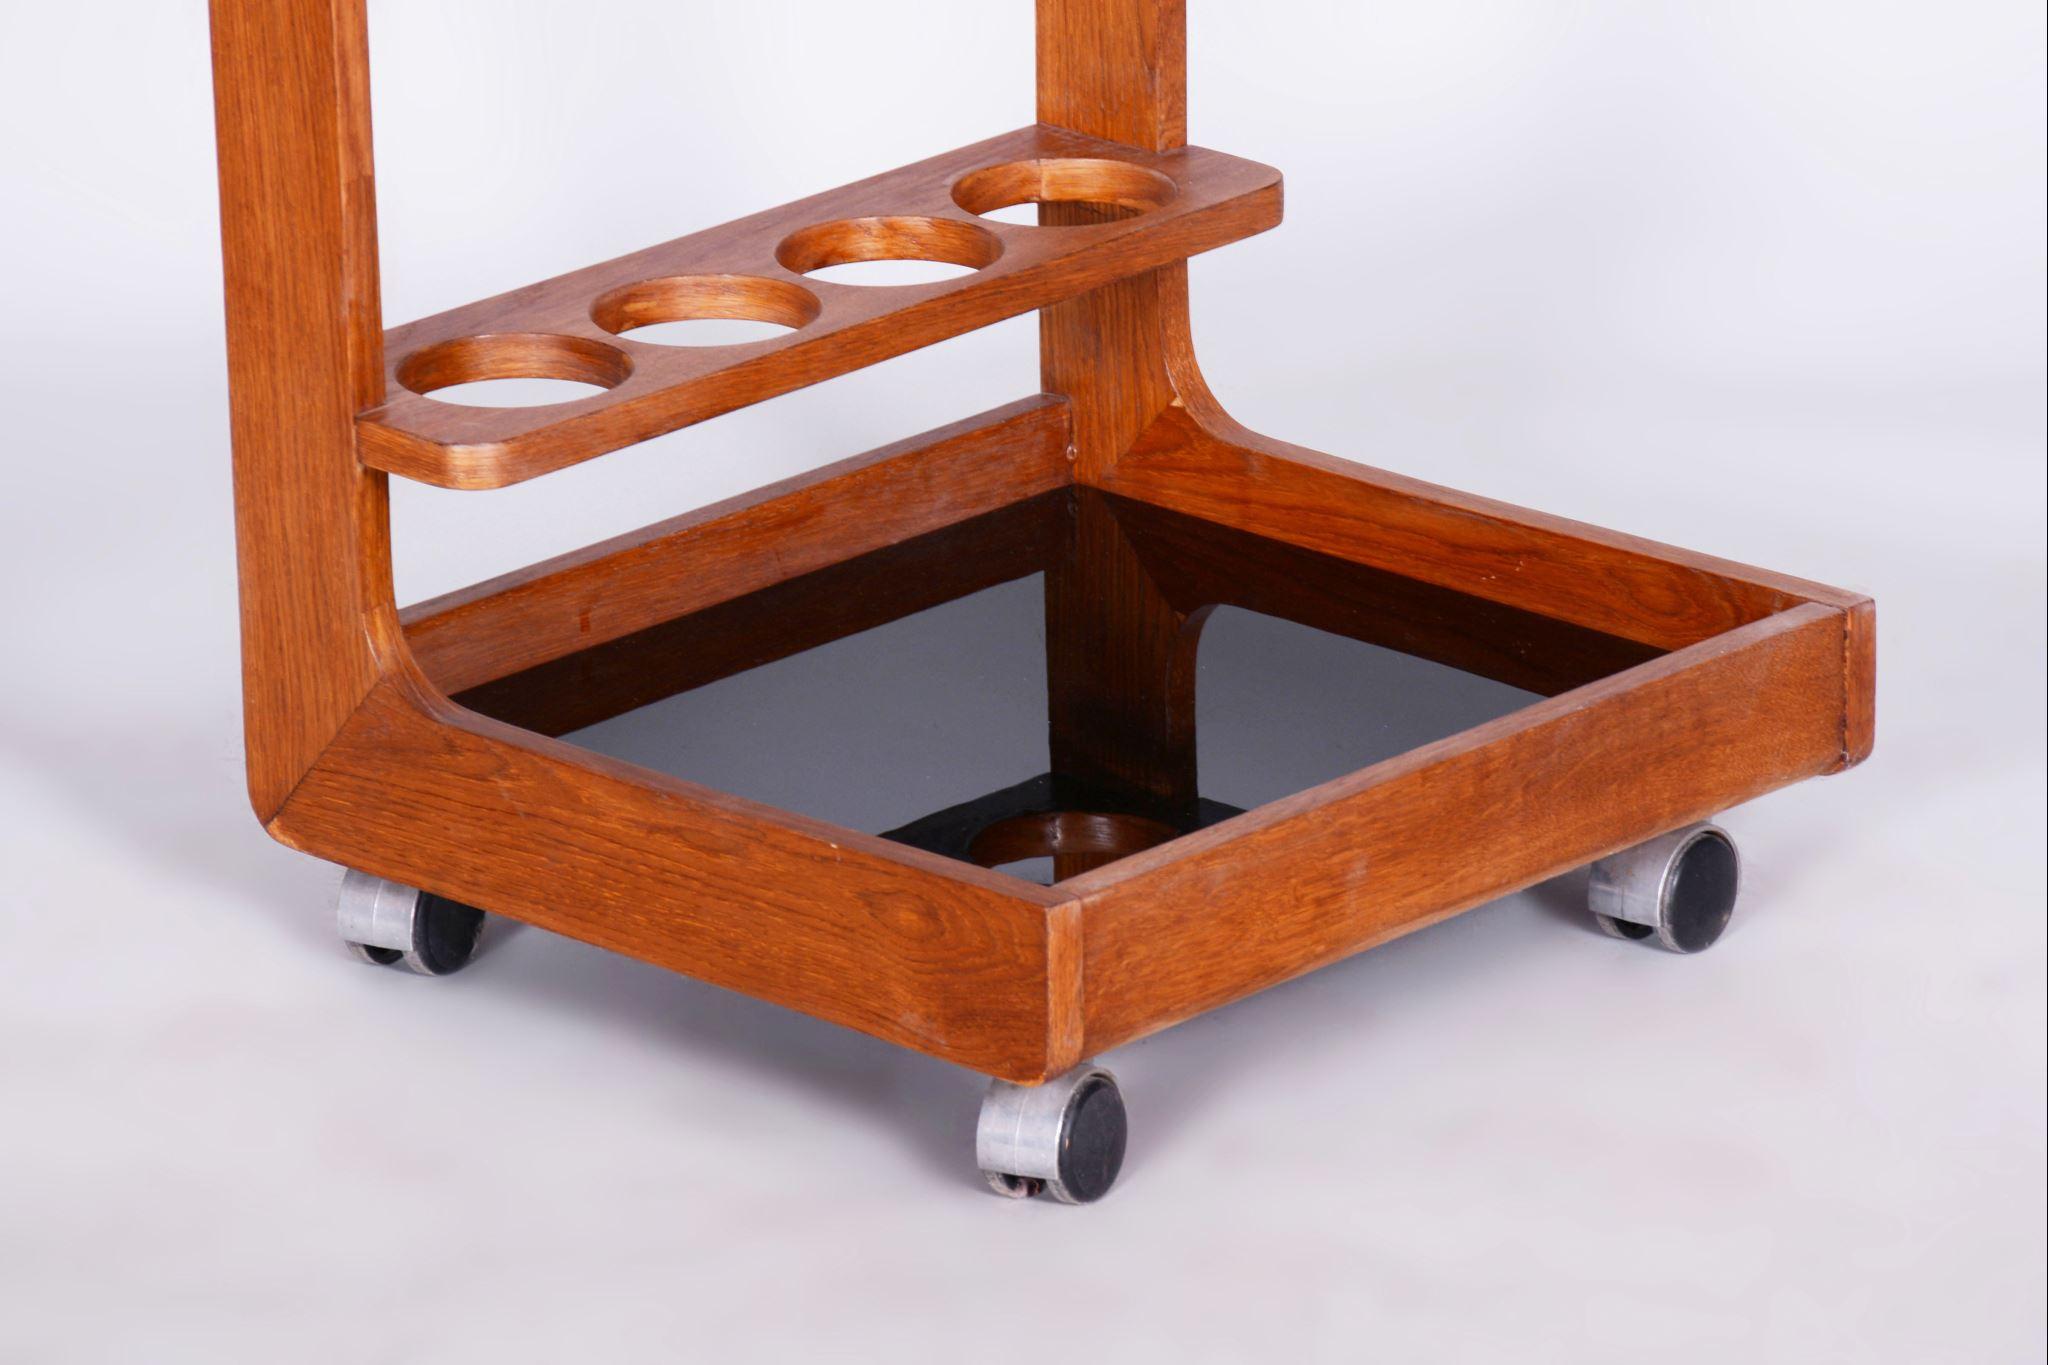 Restored Midcentury Trolley, Mahogany, Glass, Revived Polish, Czechia, 1960s For Sale 6